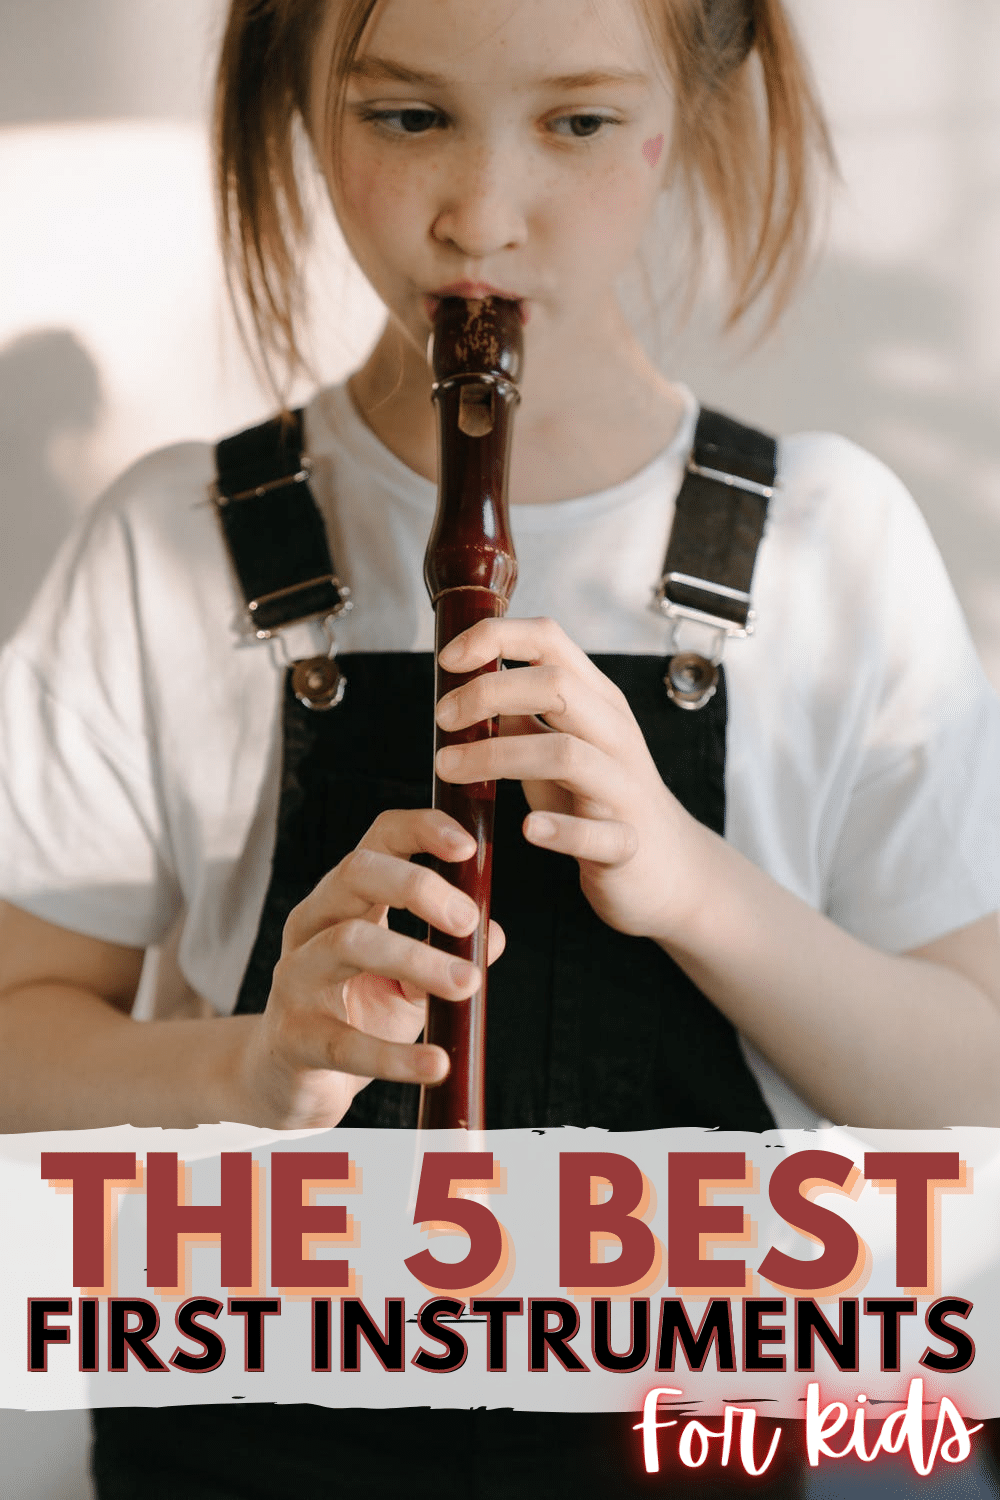 Music is so beneficial for children, especially when they learn to create it on their own. These are some of the best instruments for children to learn to foster a love of music. #childrenandmusic #firstinstruments via @wondermomwannab